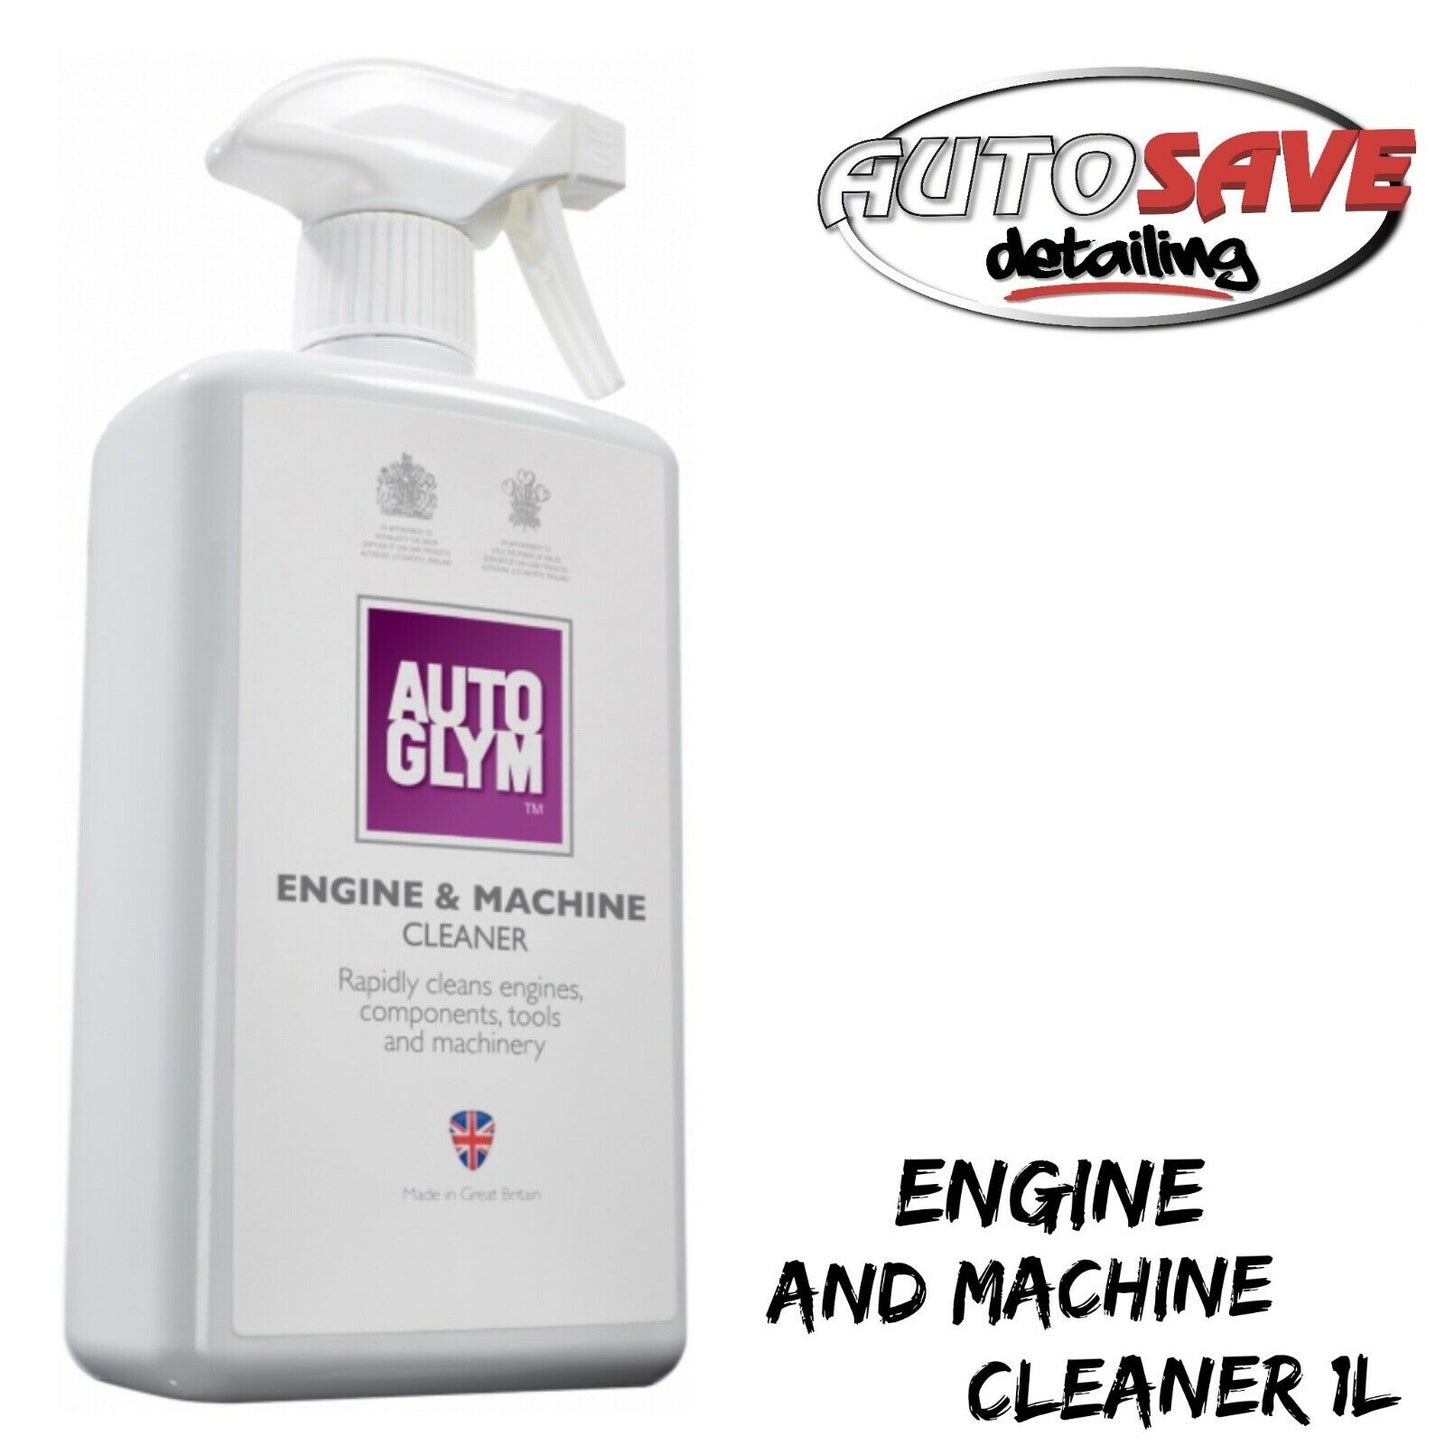 Autoglym Engine and Machine Cleaner 1 L 1 Litre Cleaner Degreaser